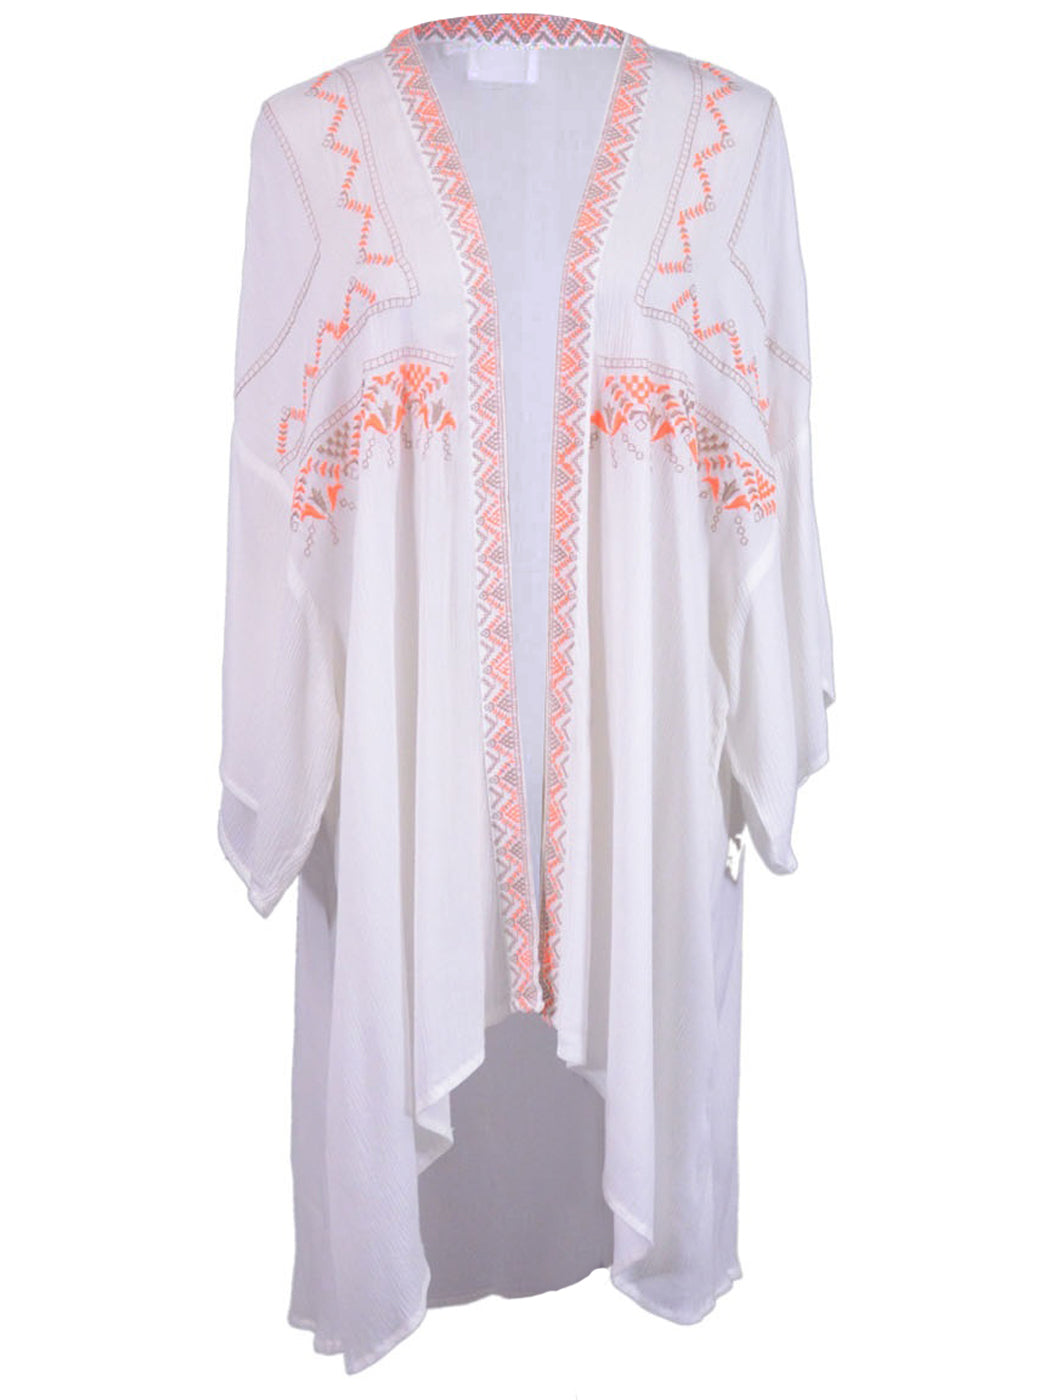 Lush Embroidery Trim Details Kimono Sleeves Hi-Low Long Open Front Cardigan